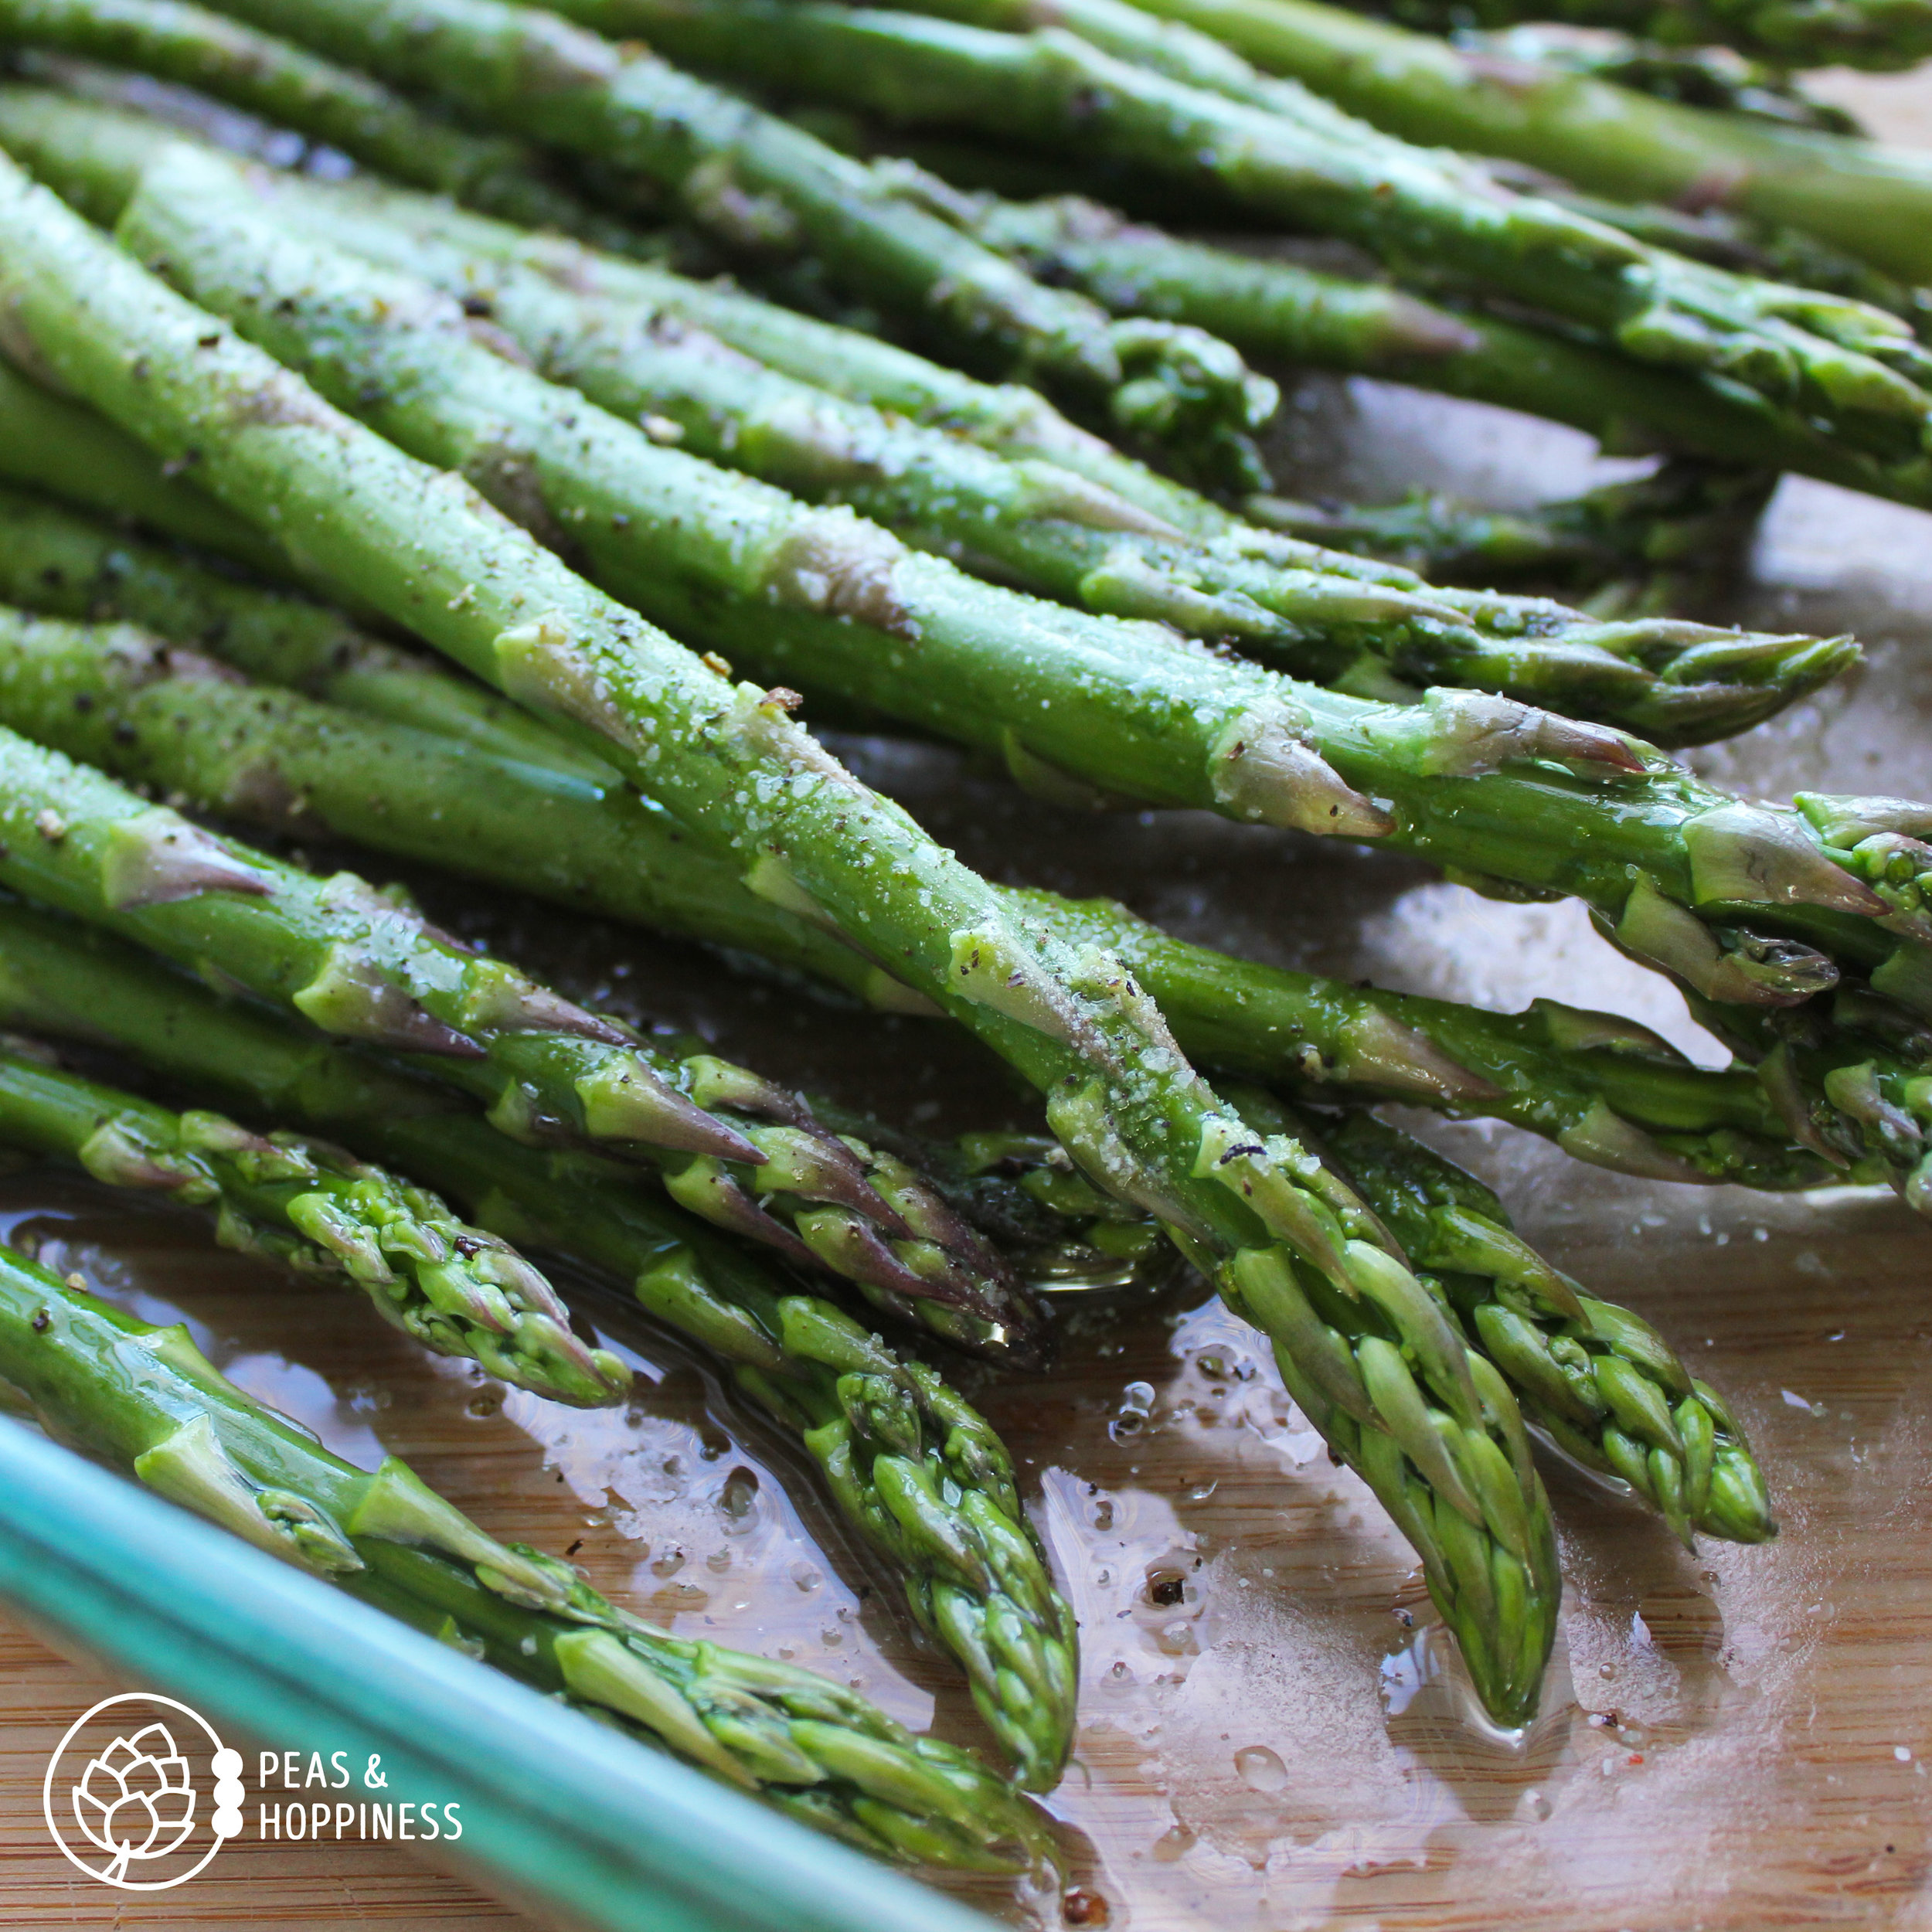 Pair roasted asparagus with... steak? chicken? fish? What's the ideal protein (and how much do you need?)